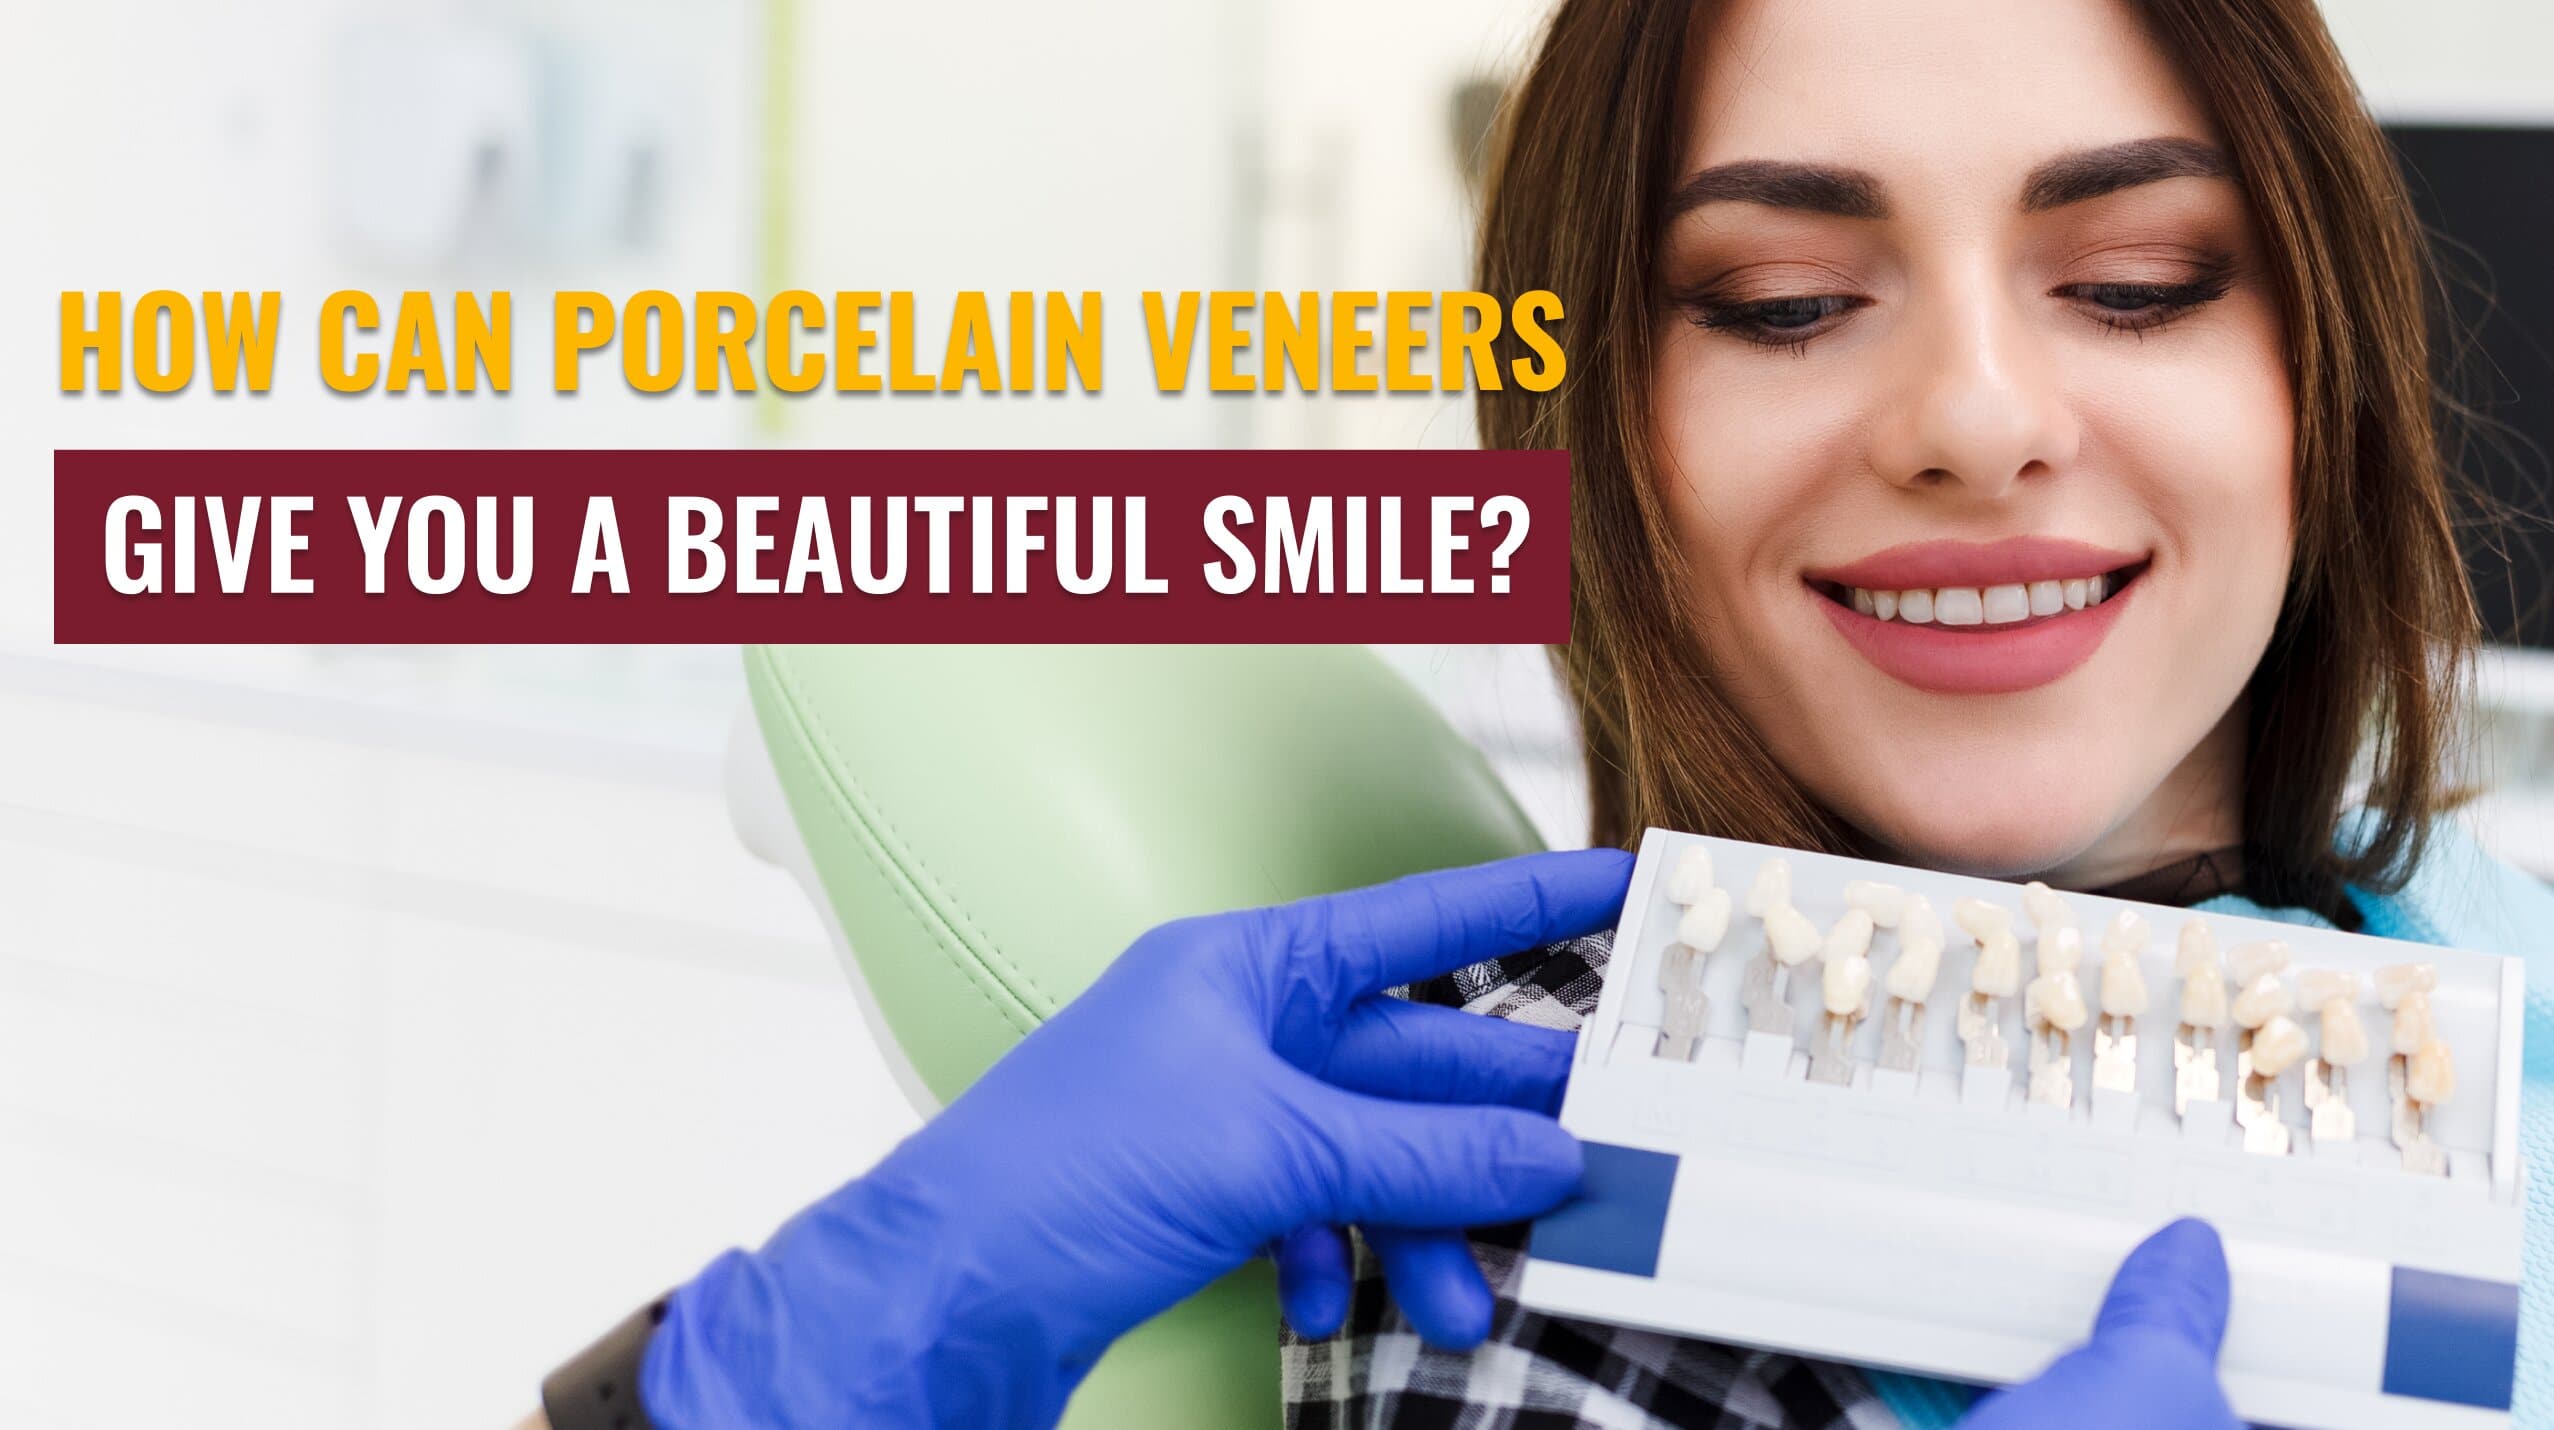 How Can Porcelain Veneers Give You a Beautiful Smile